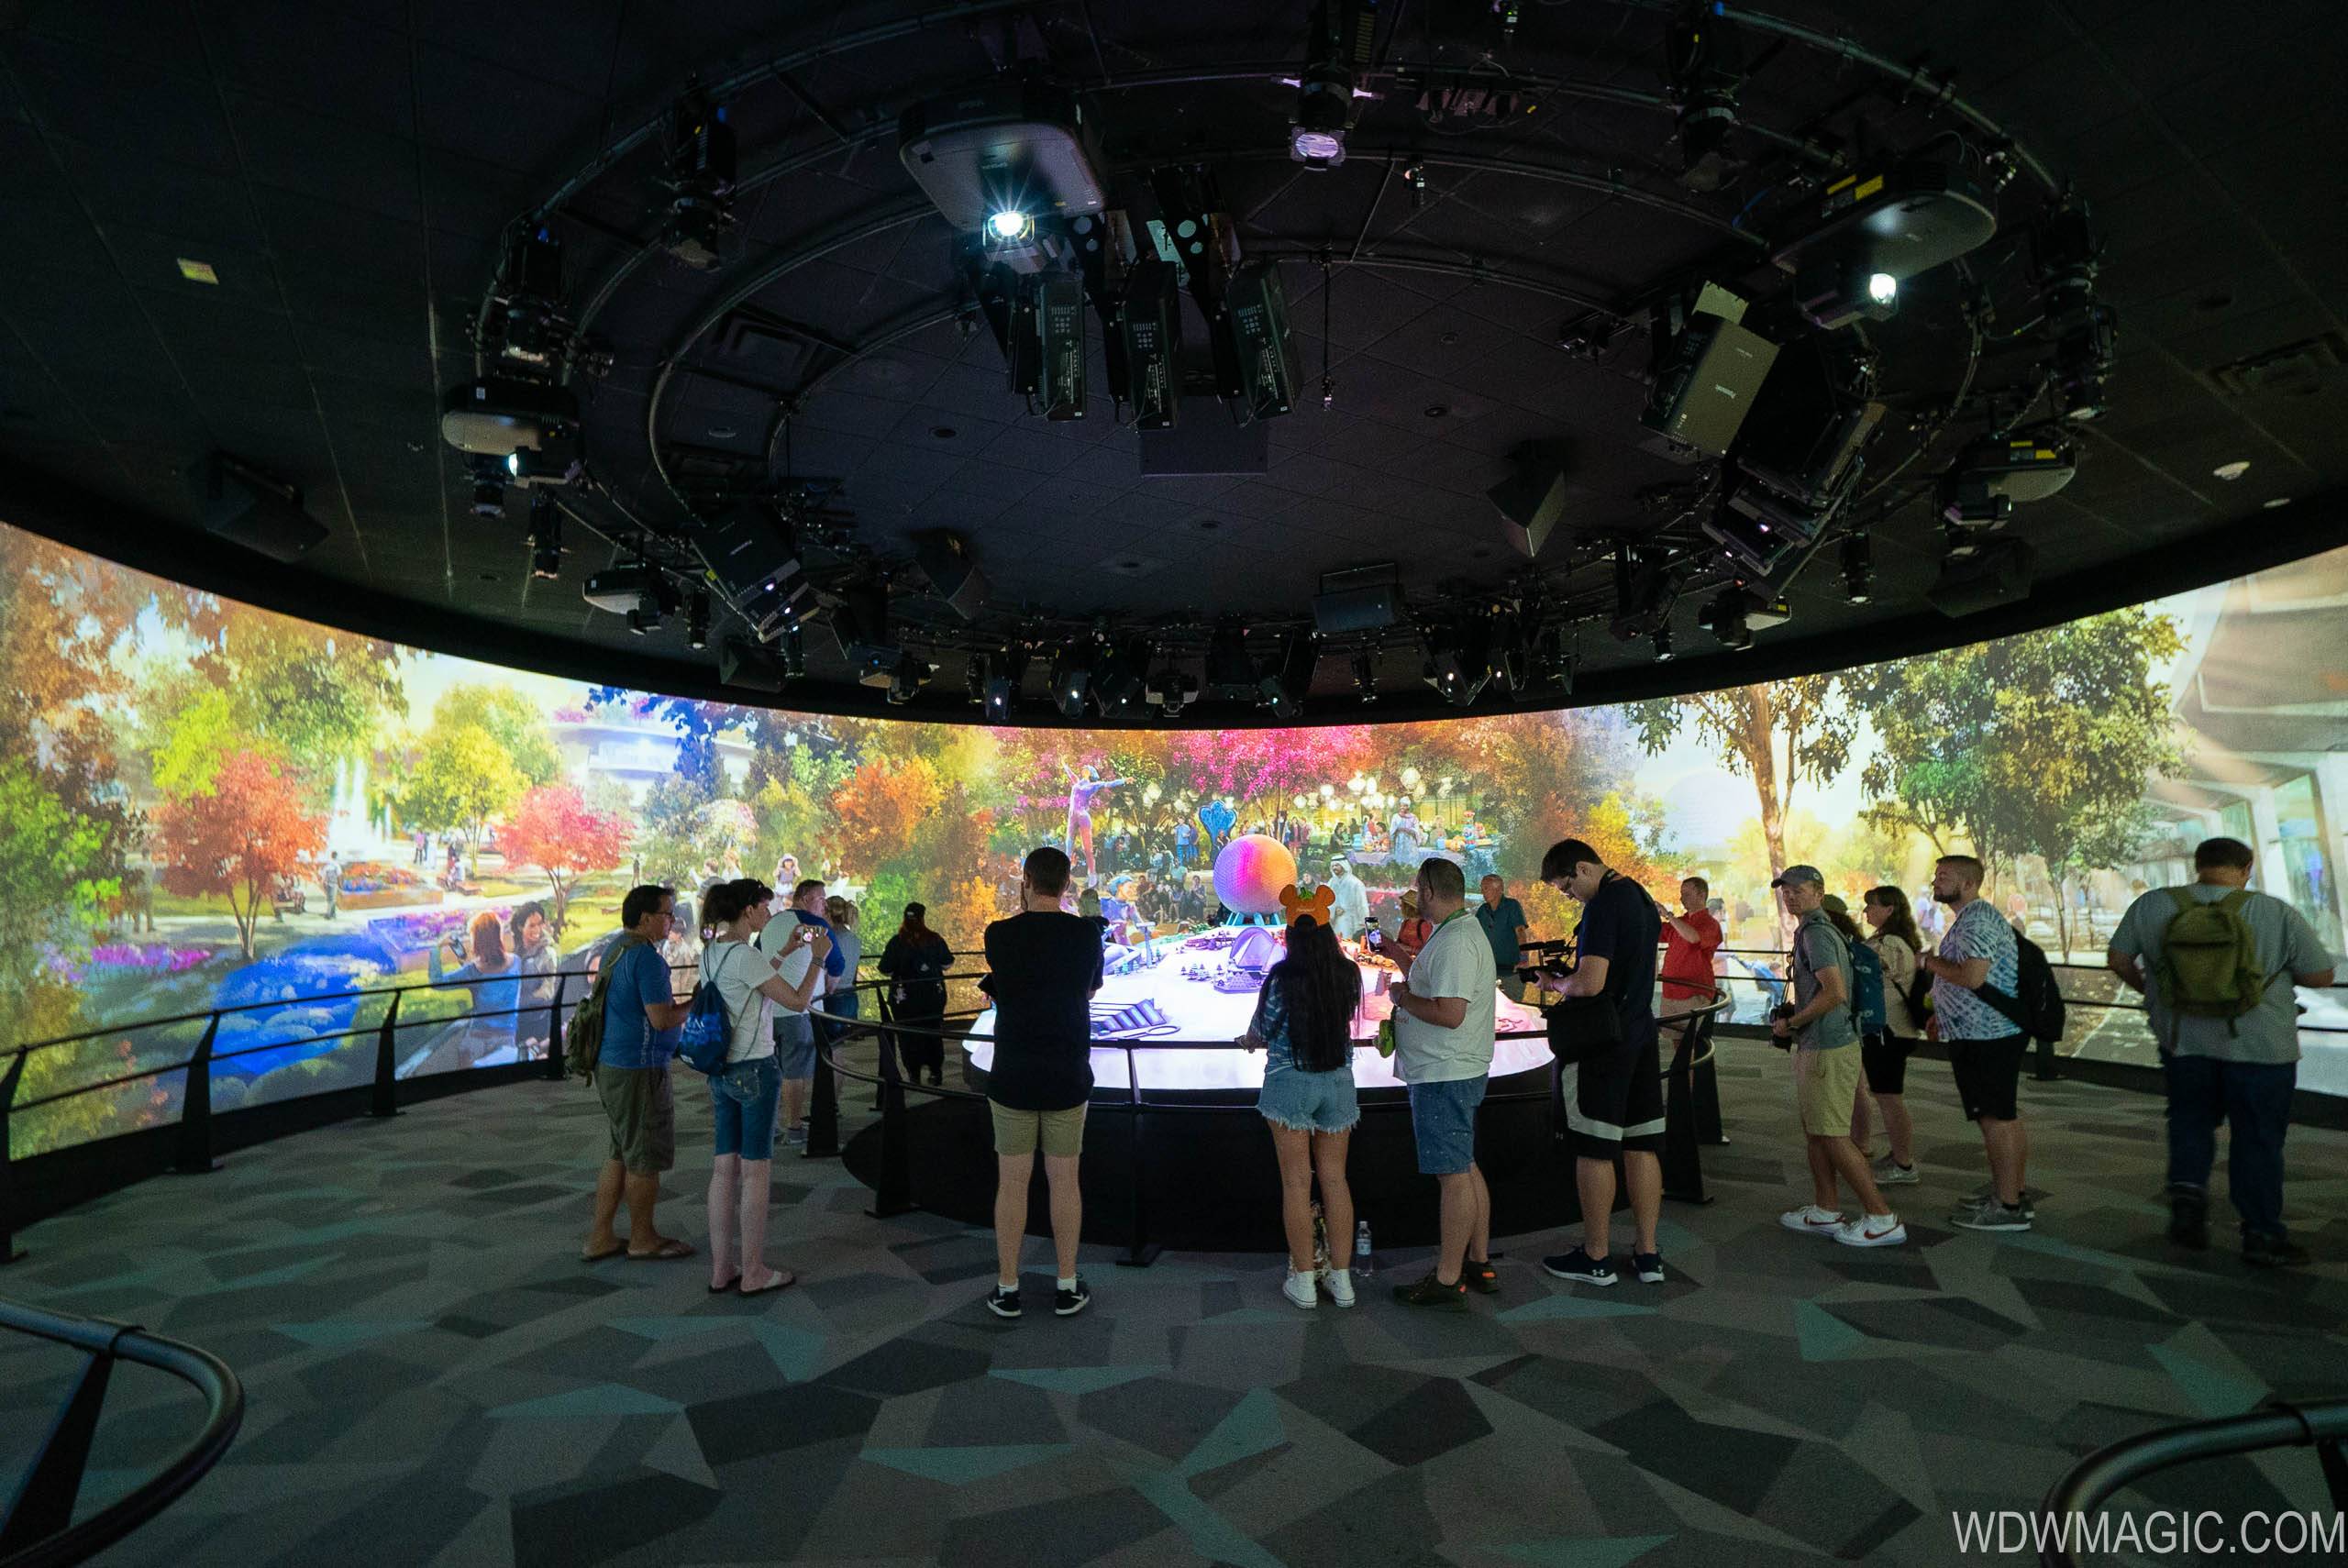 Walt Disney Imagineering presents the Epcot Experience overview